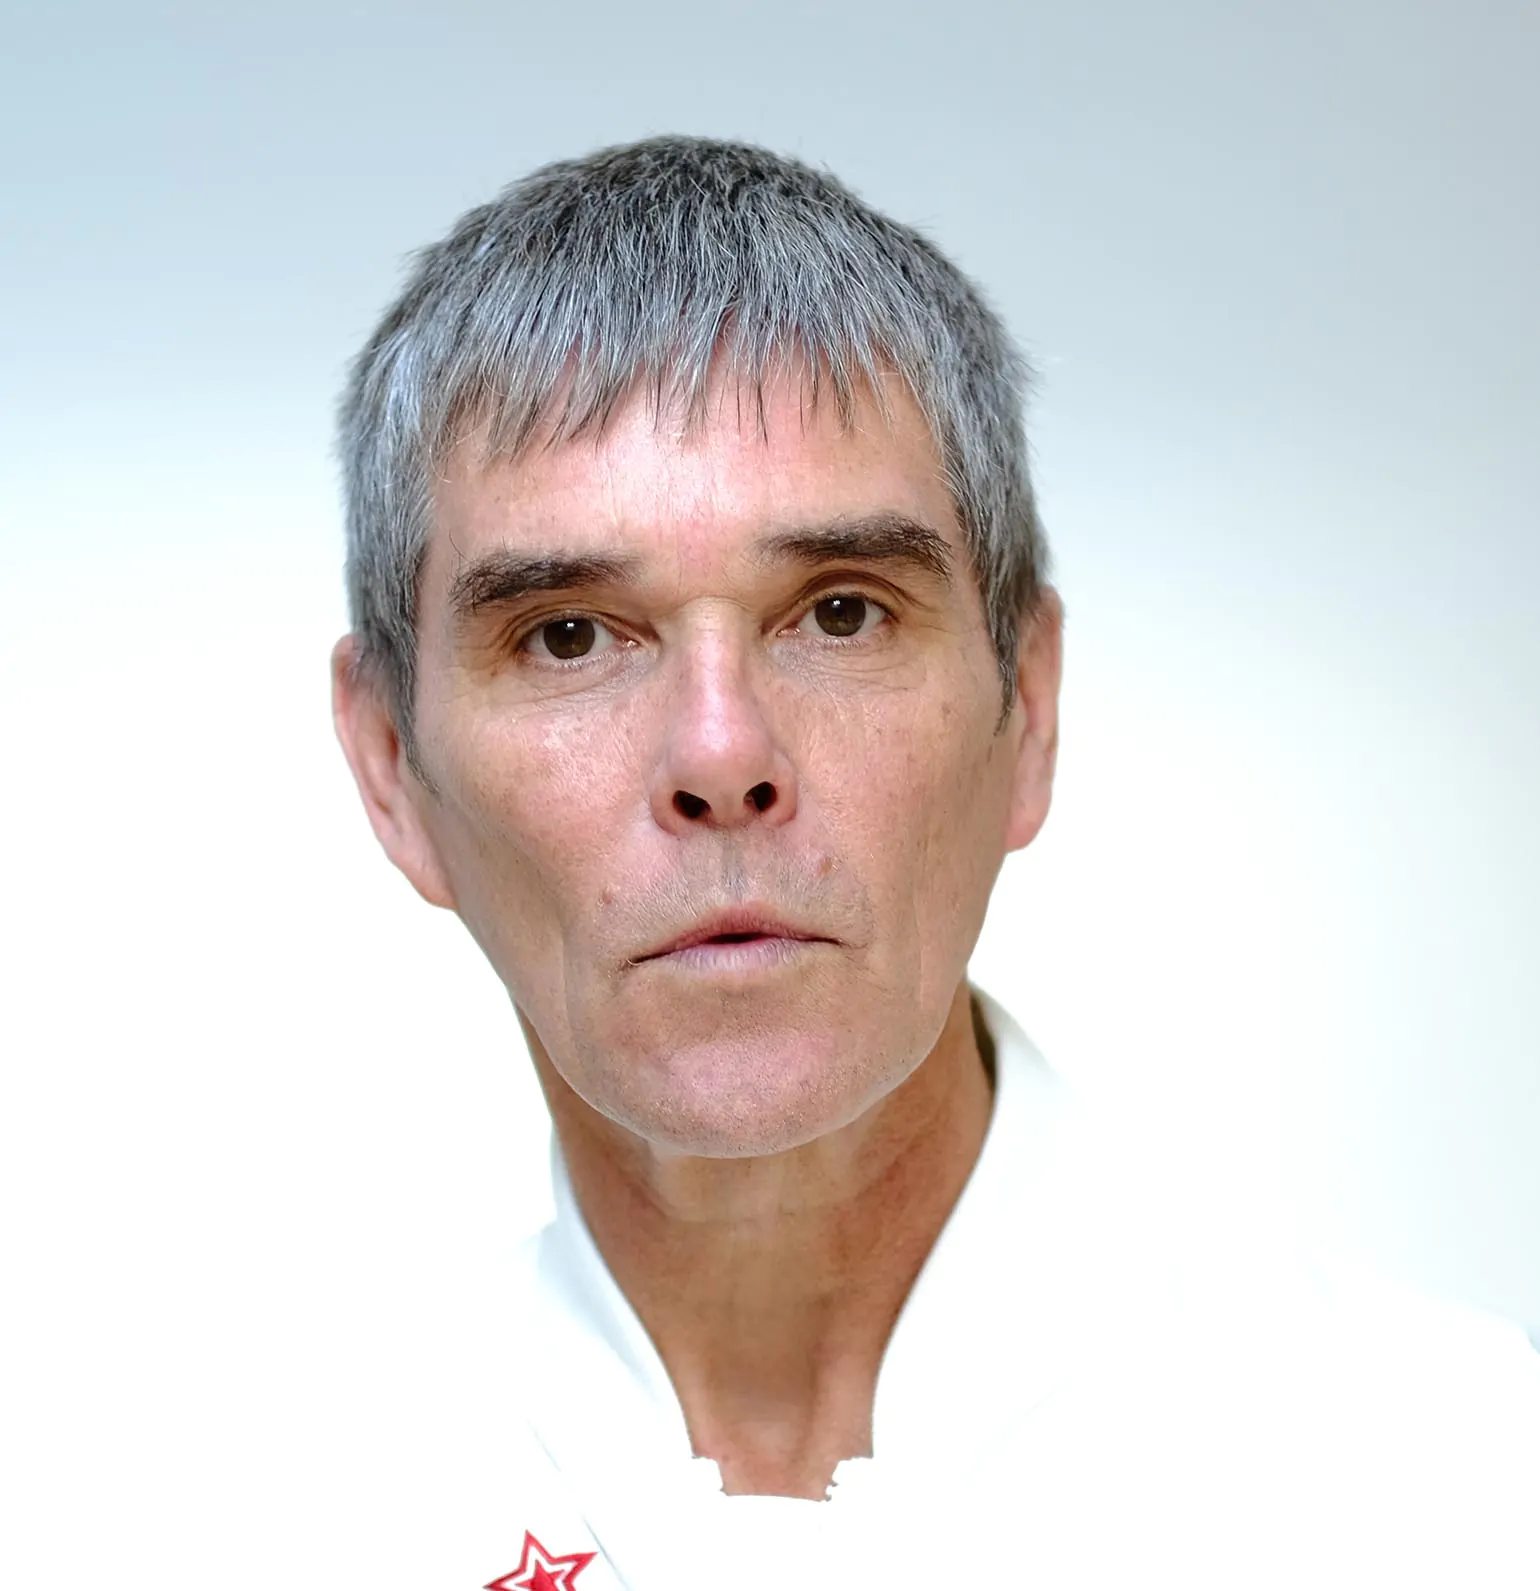 IAN BROWN announces a headline tour of Ireland in May 2020